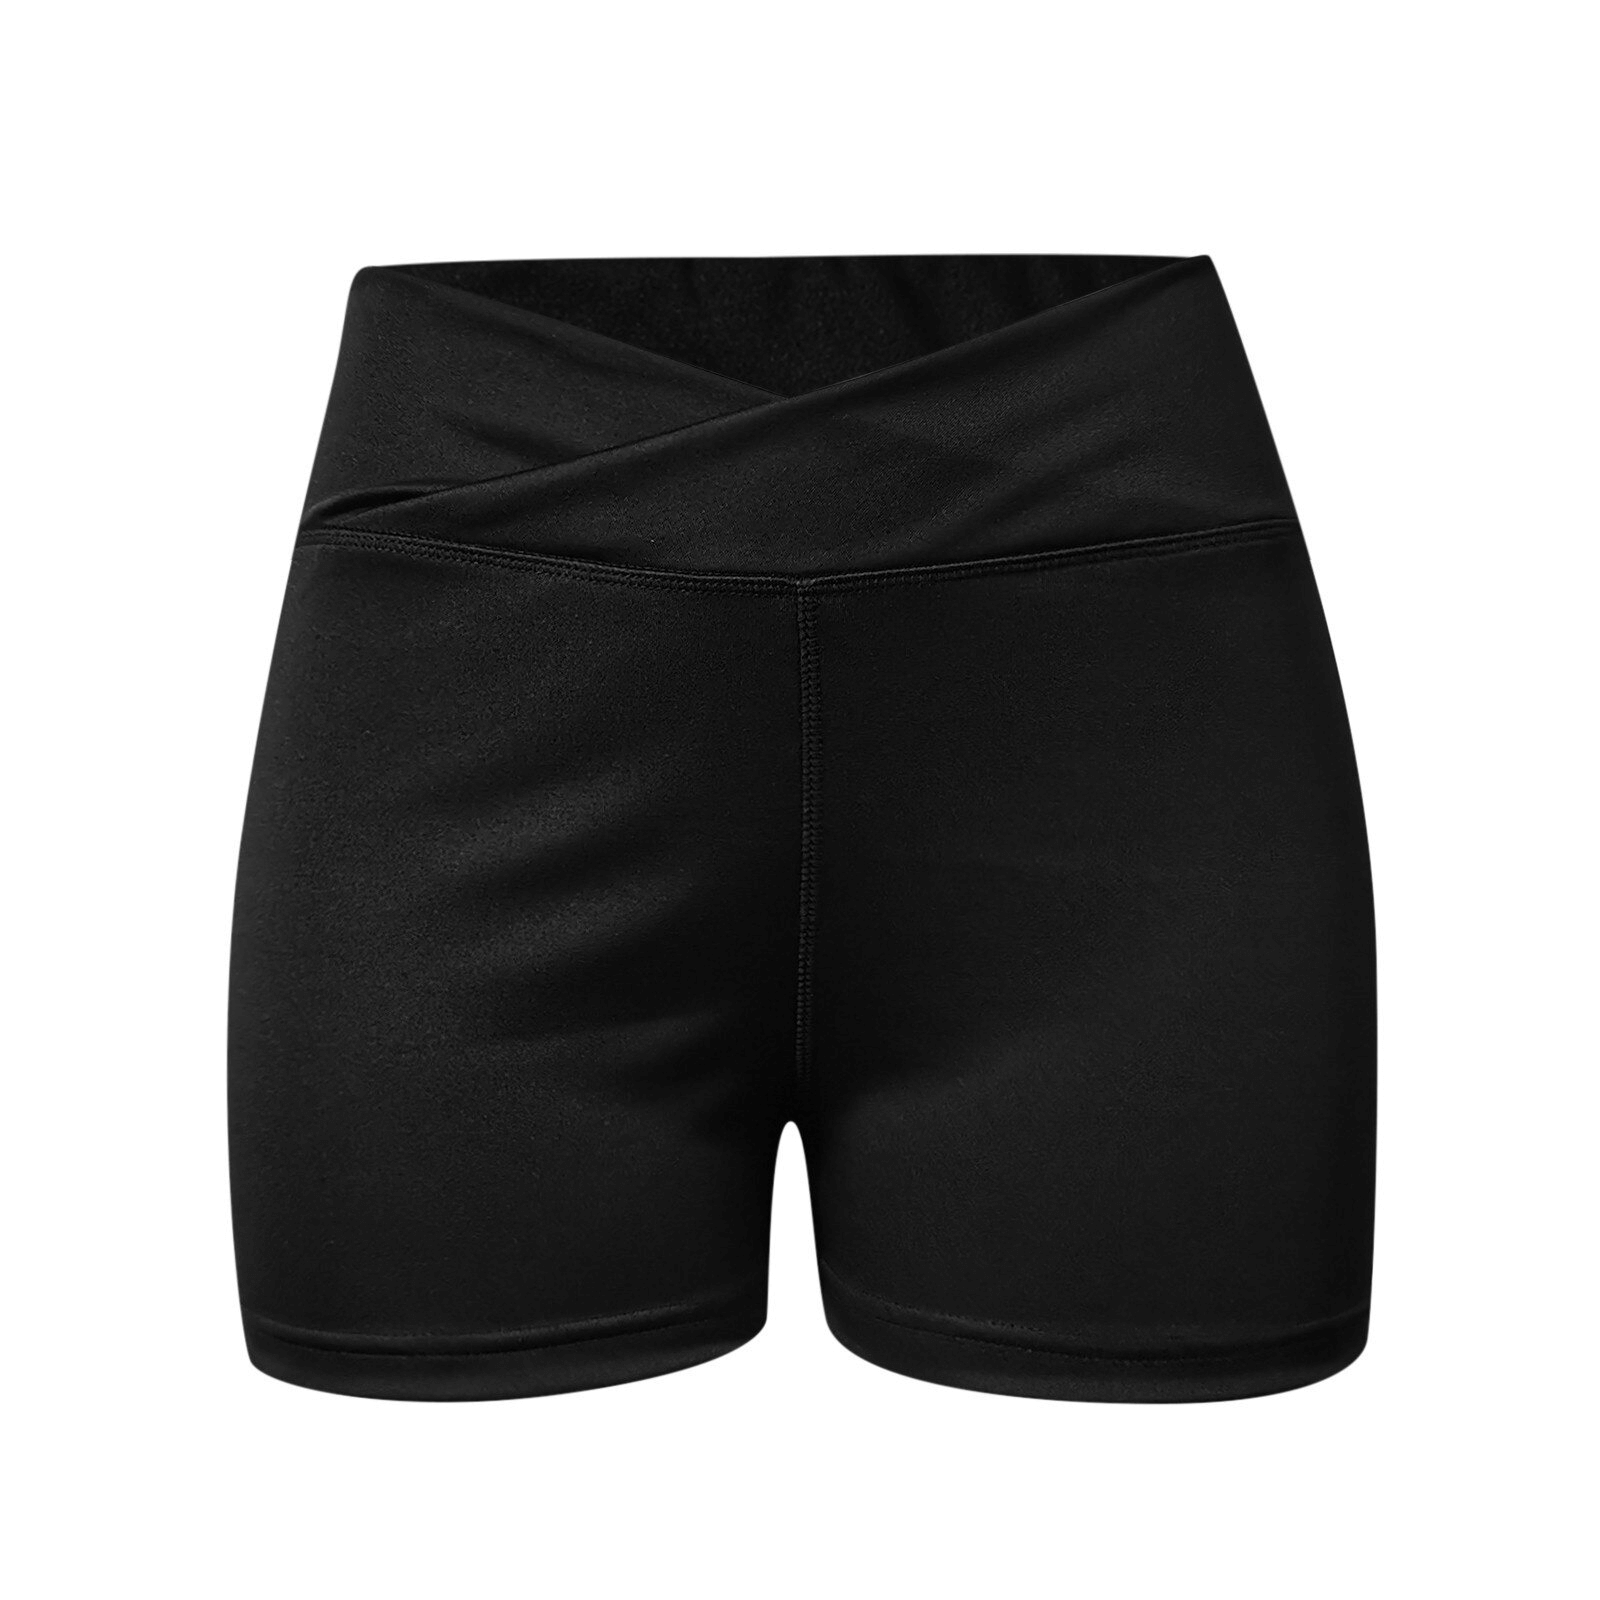 Fitness High Waist Shorts for Women / Solid Color Running Training Shorts - SF0080